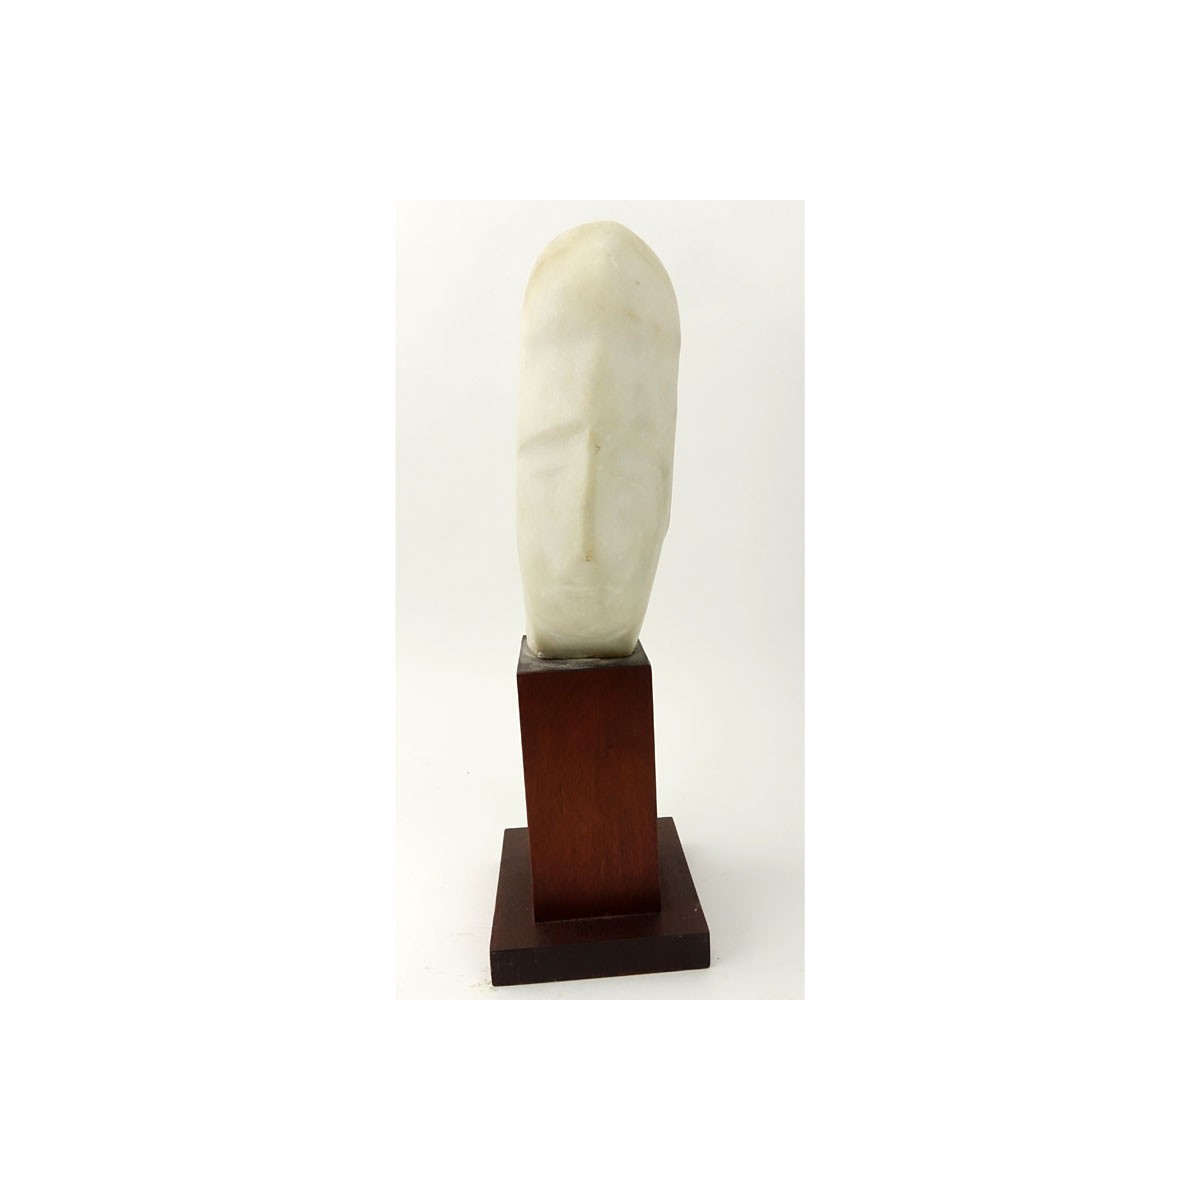 Mid Century Abstract Marble Bust on Wooden Base. Signed. Good condition. Measures 19" H. (estimate 